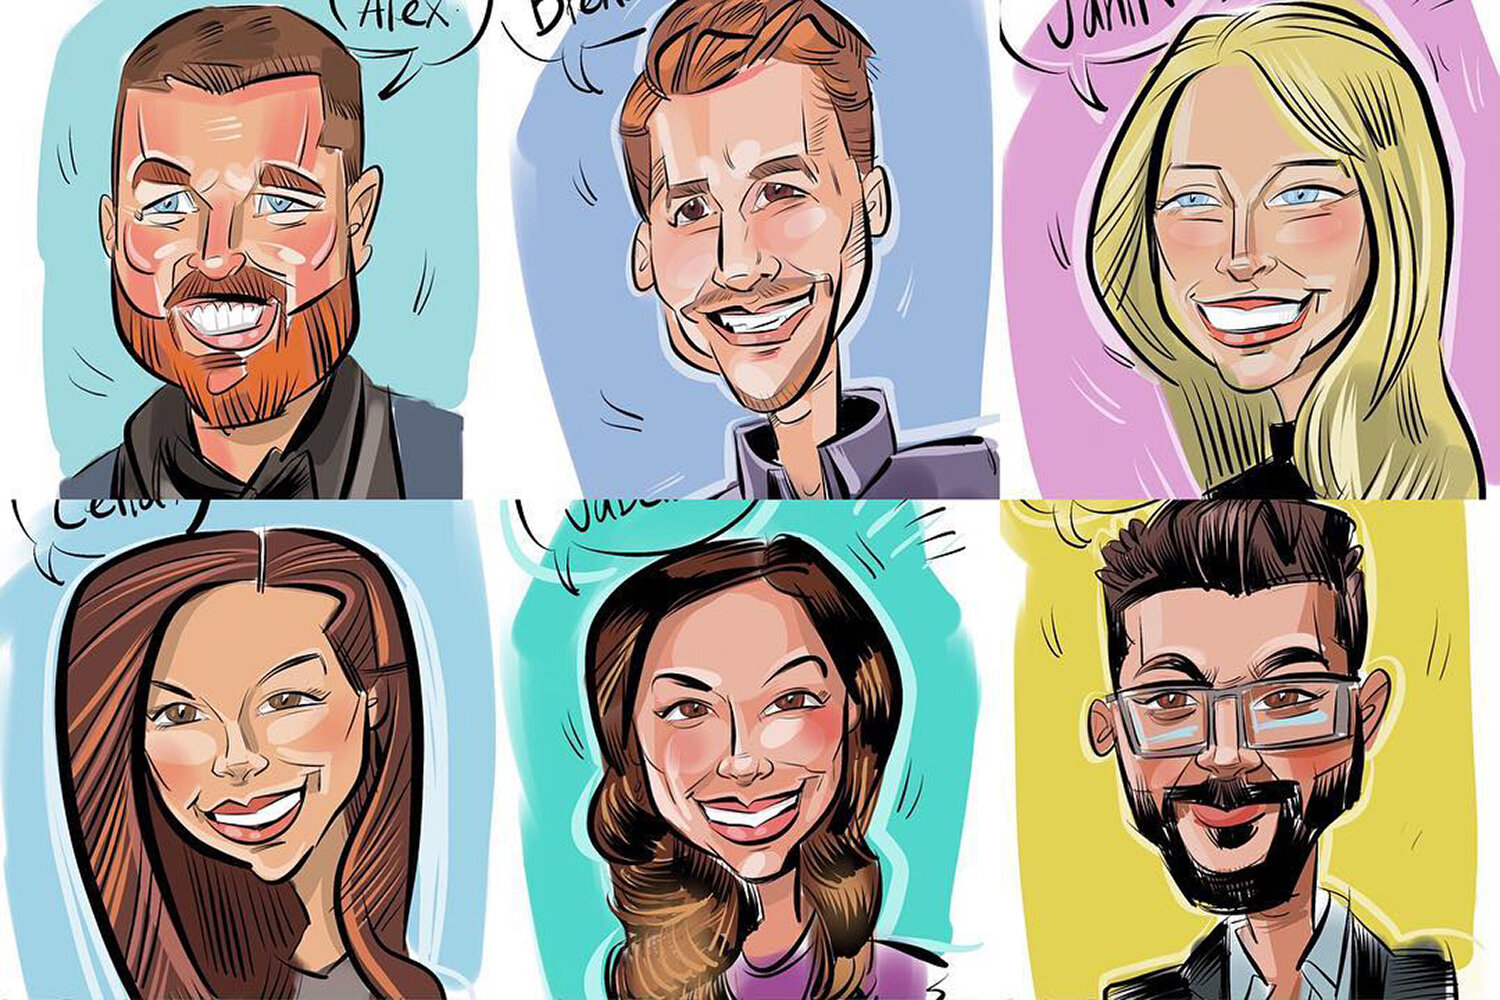 The iPad becomes the canvas, creating digital artwork that is share worthy. Our talented digital artists create caricatures, videos and capture meeting content.